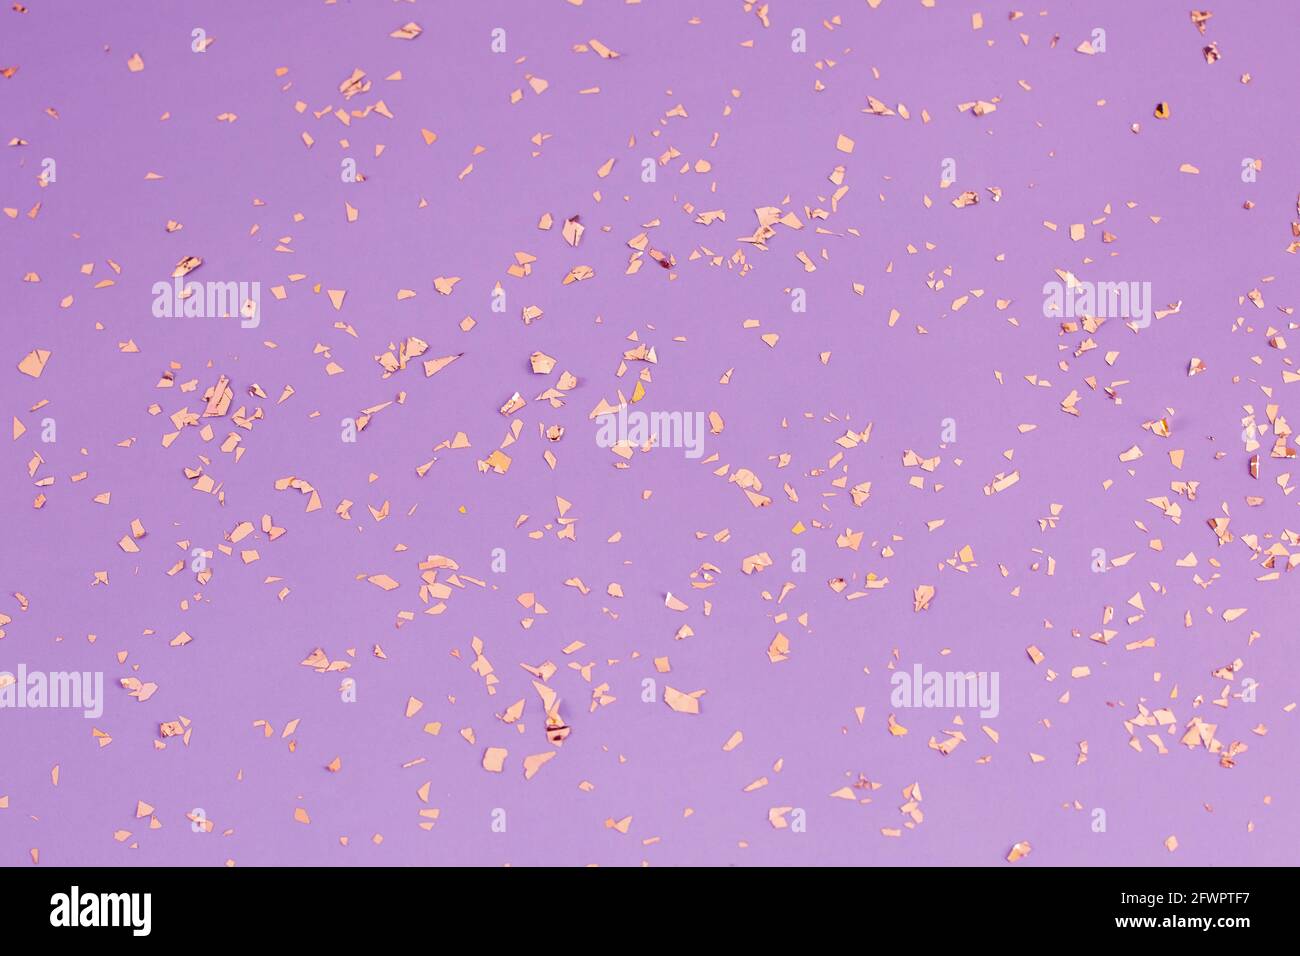 Falling golden glitter confetti isolated on white background. Shiny  particles. Stock Photo by kasiopeja999